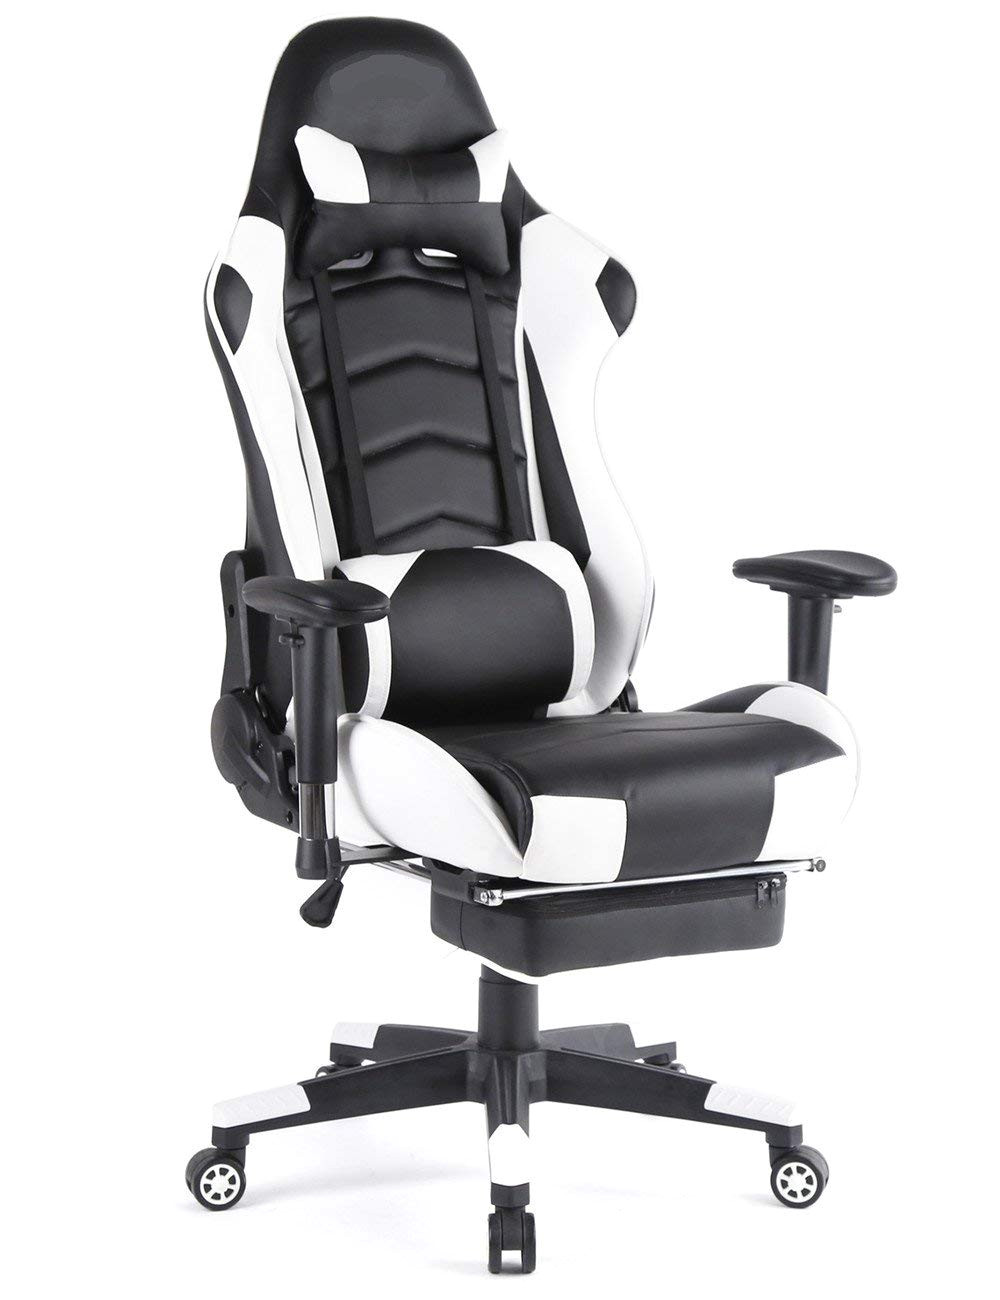 amazon com top gamer ergonomic gaming chair high back swivel computer office chair with footrest adjusting headrest and lumbar support racing chair